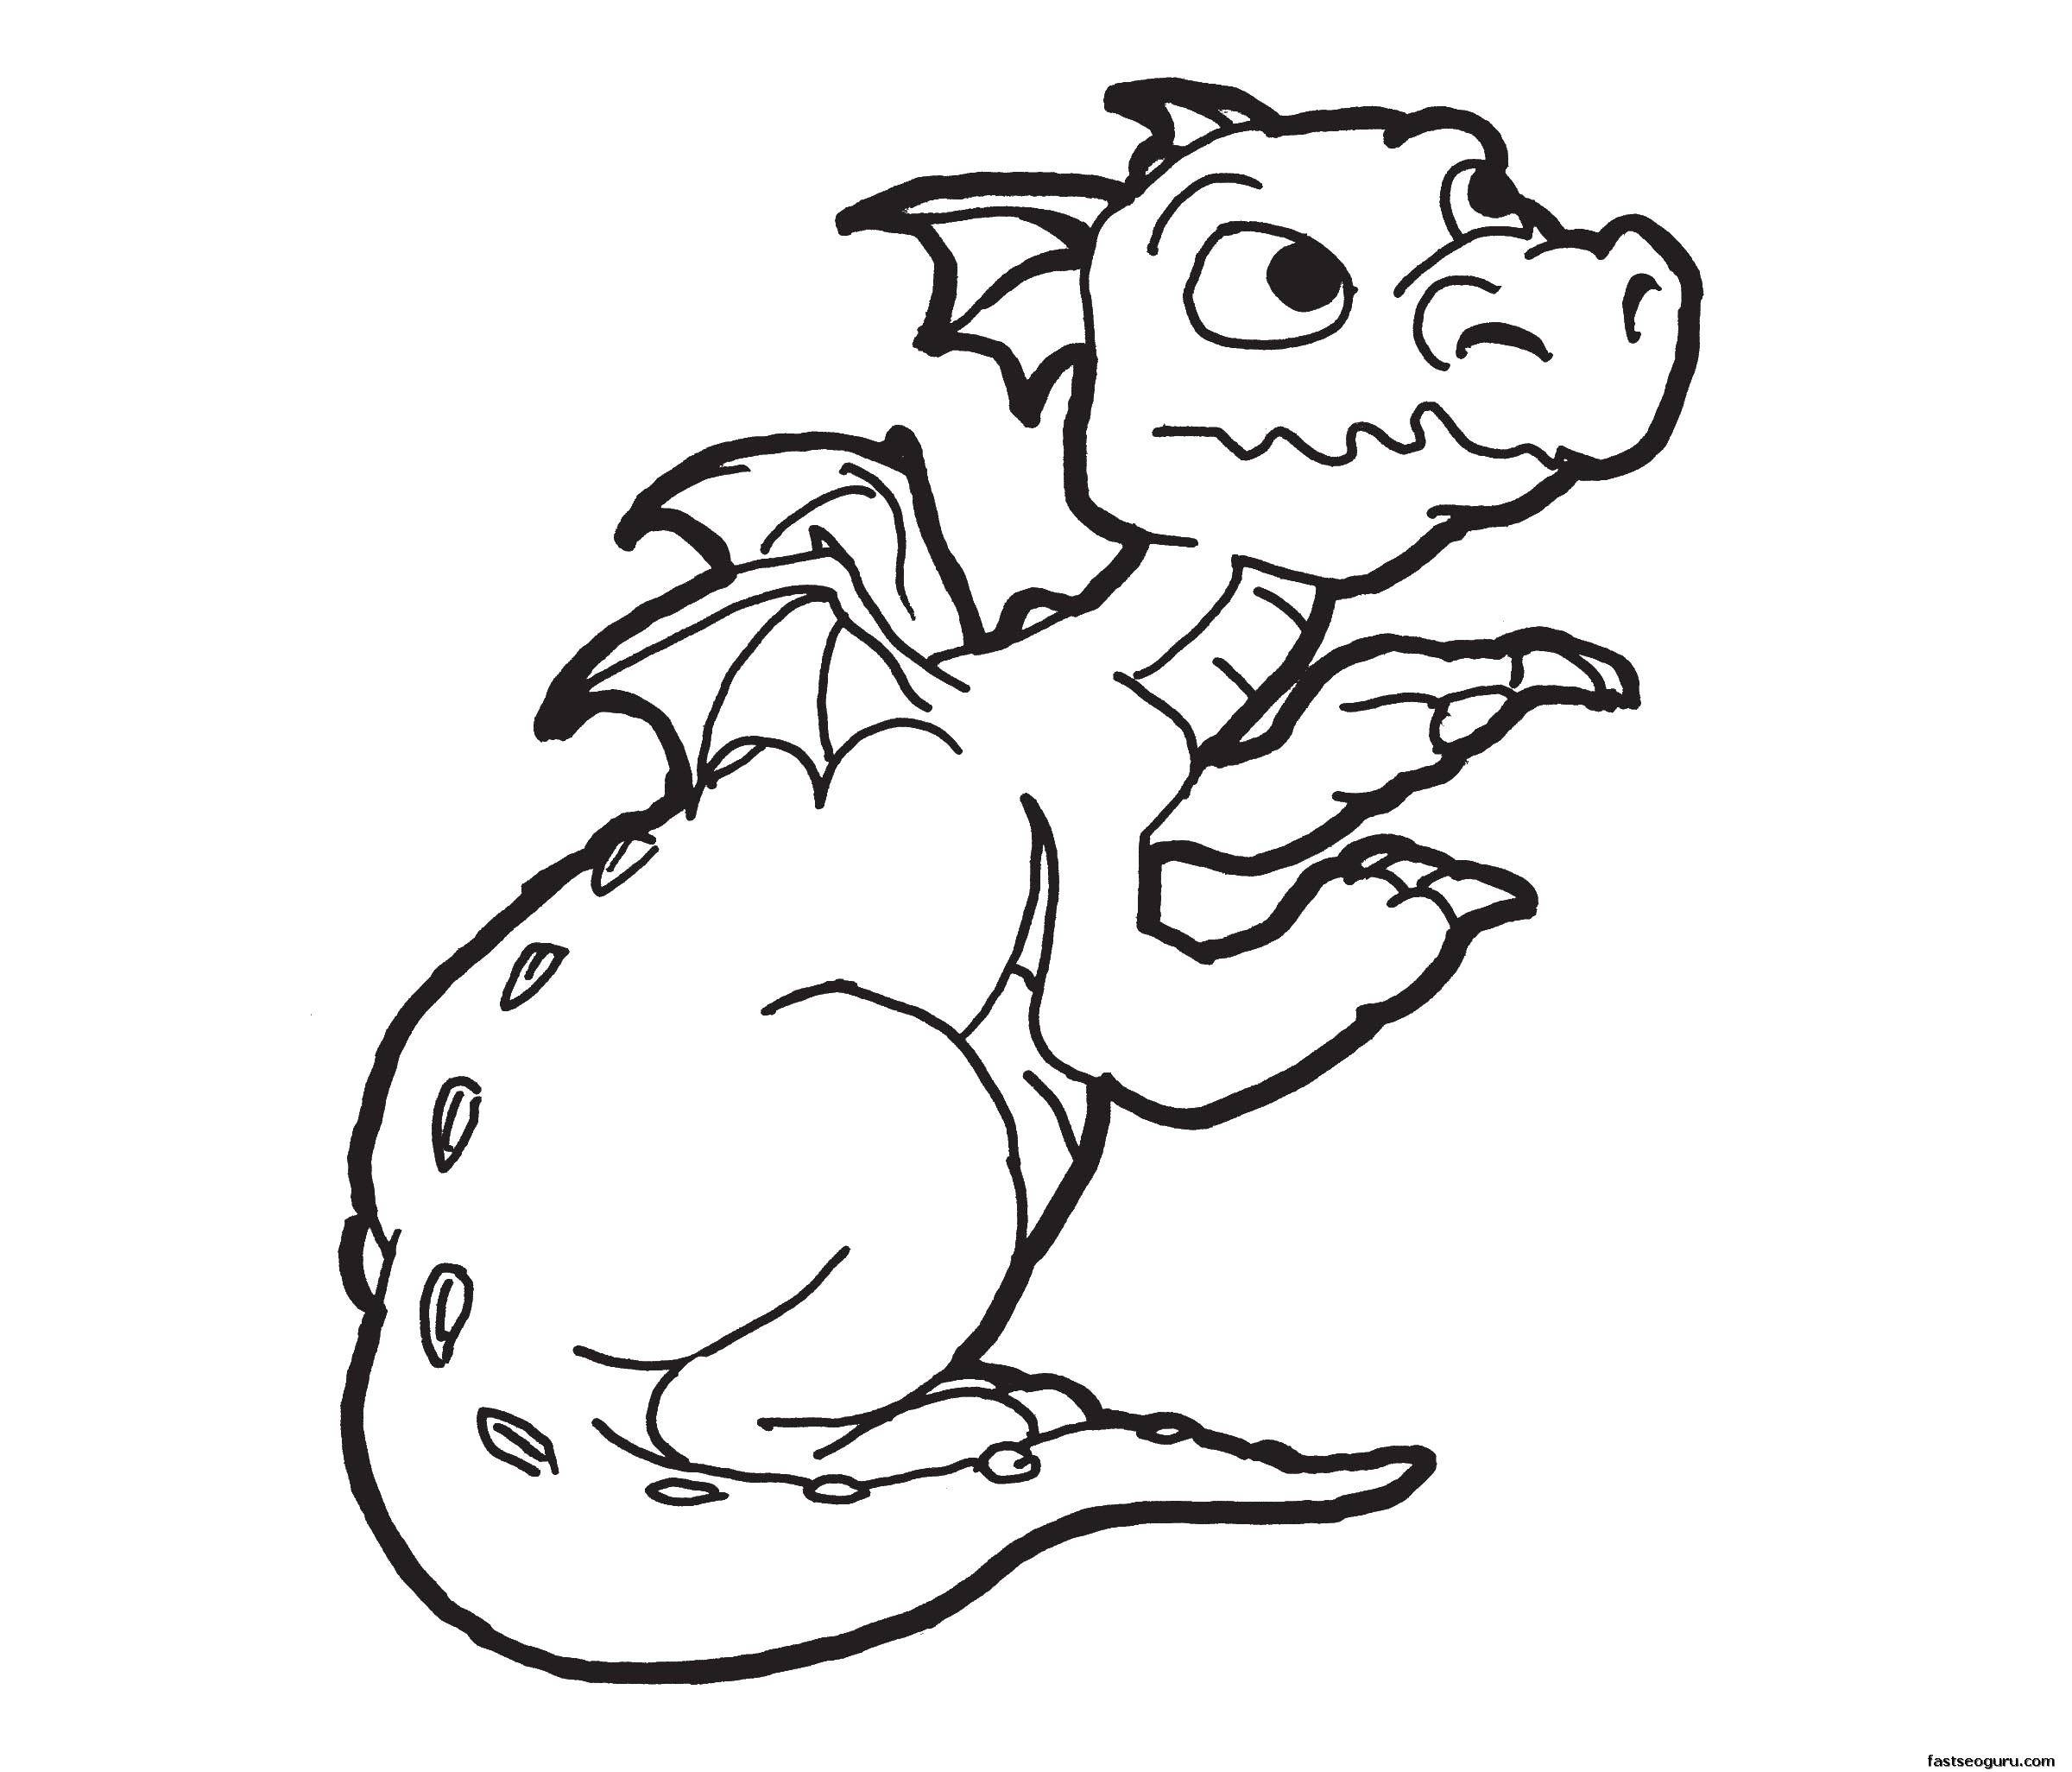 Coloring Dragon kid. Category Dragons. Tags:  dragon, baby, wings.